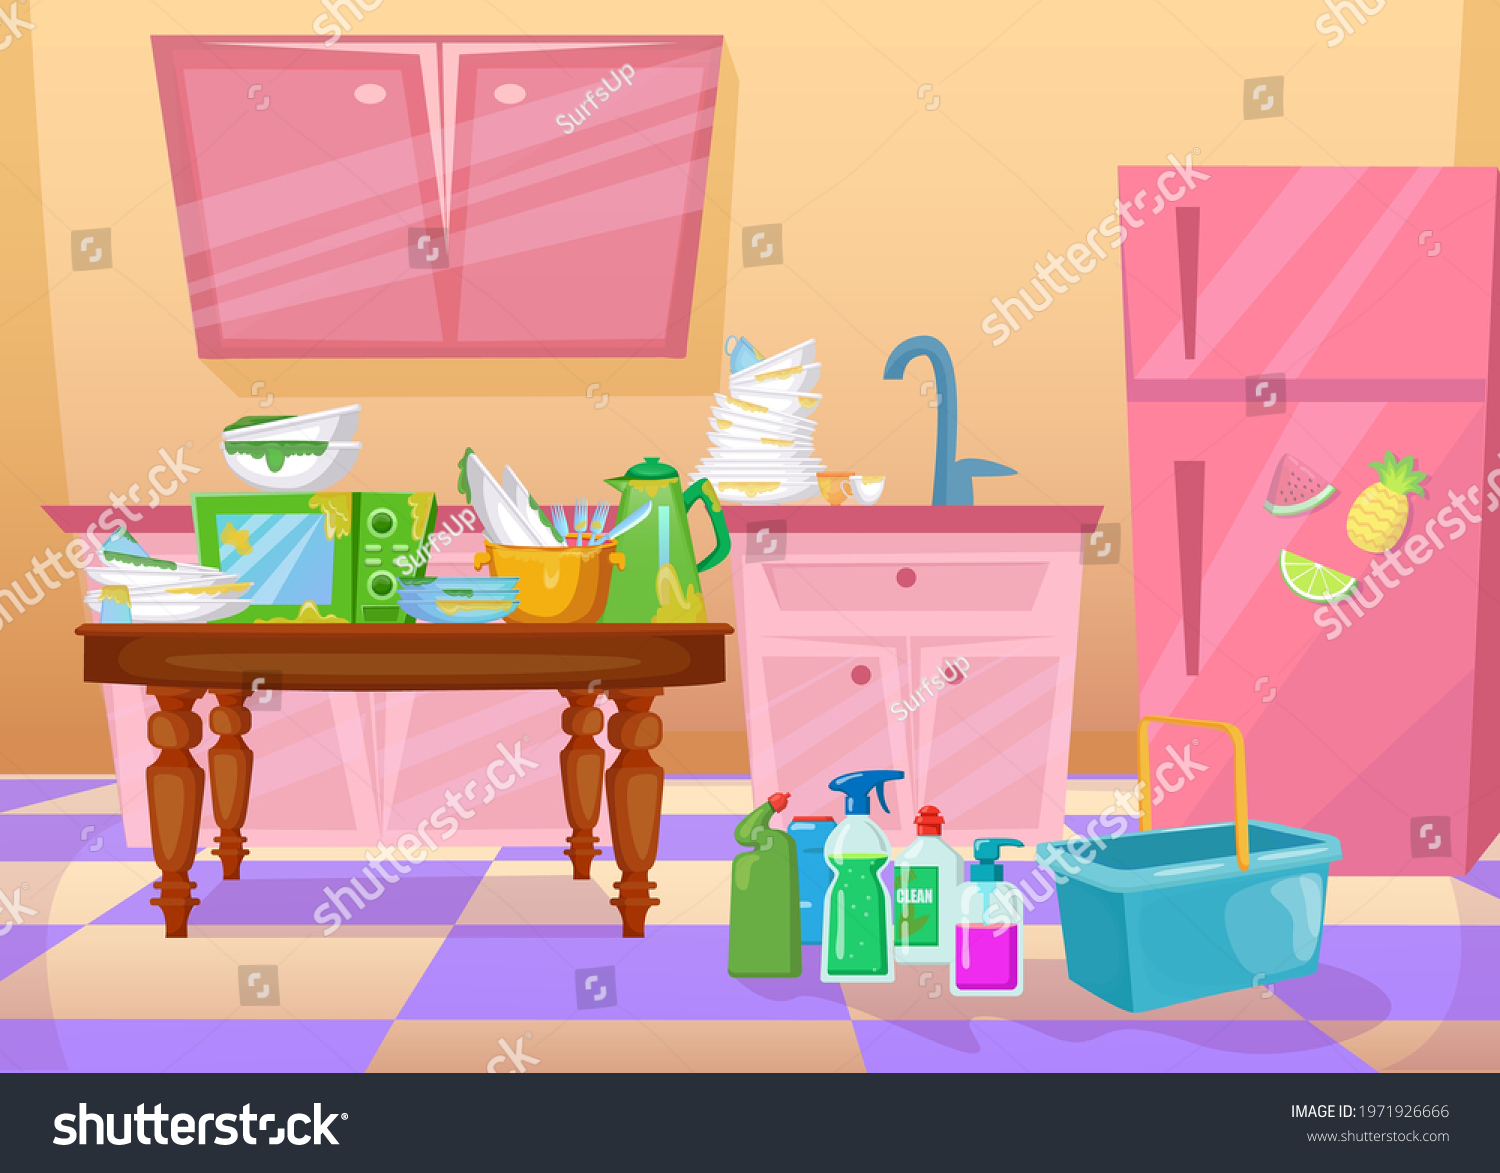 Stock Vector Mess In Kitchen Cartoon Vector Illustration Dirty Dishes Plates Utensils And Detergents In 1971926666 